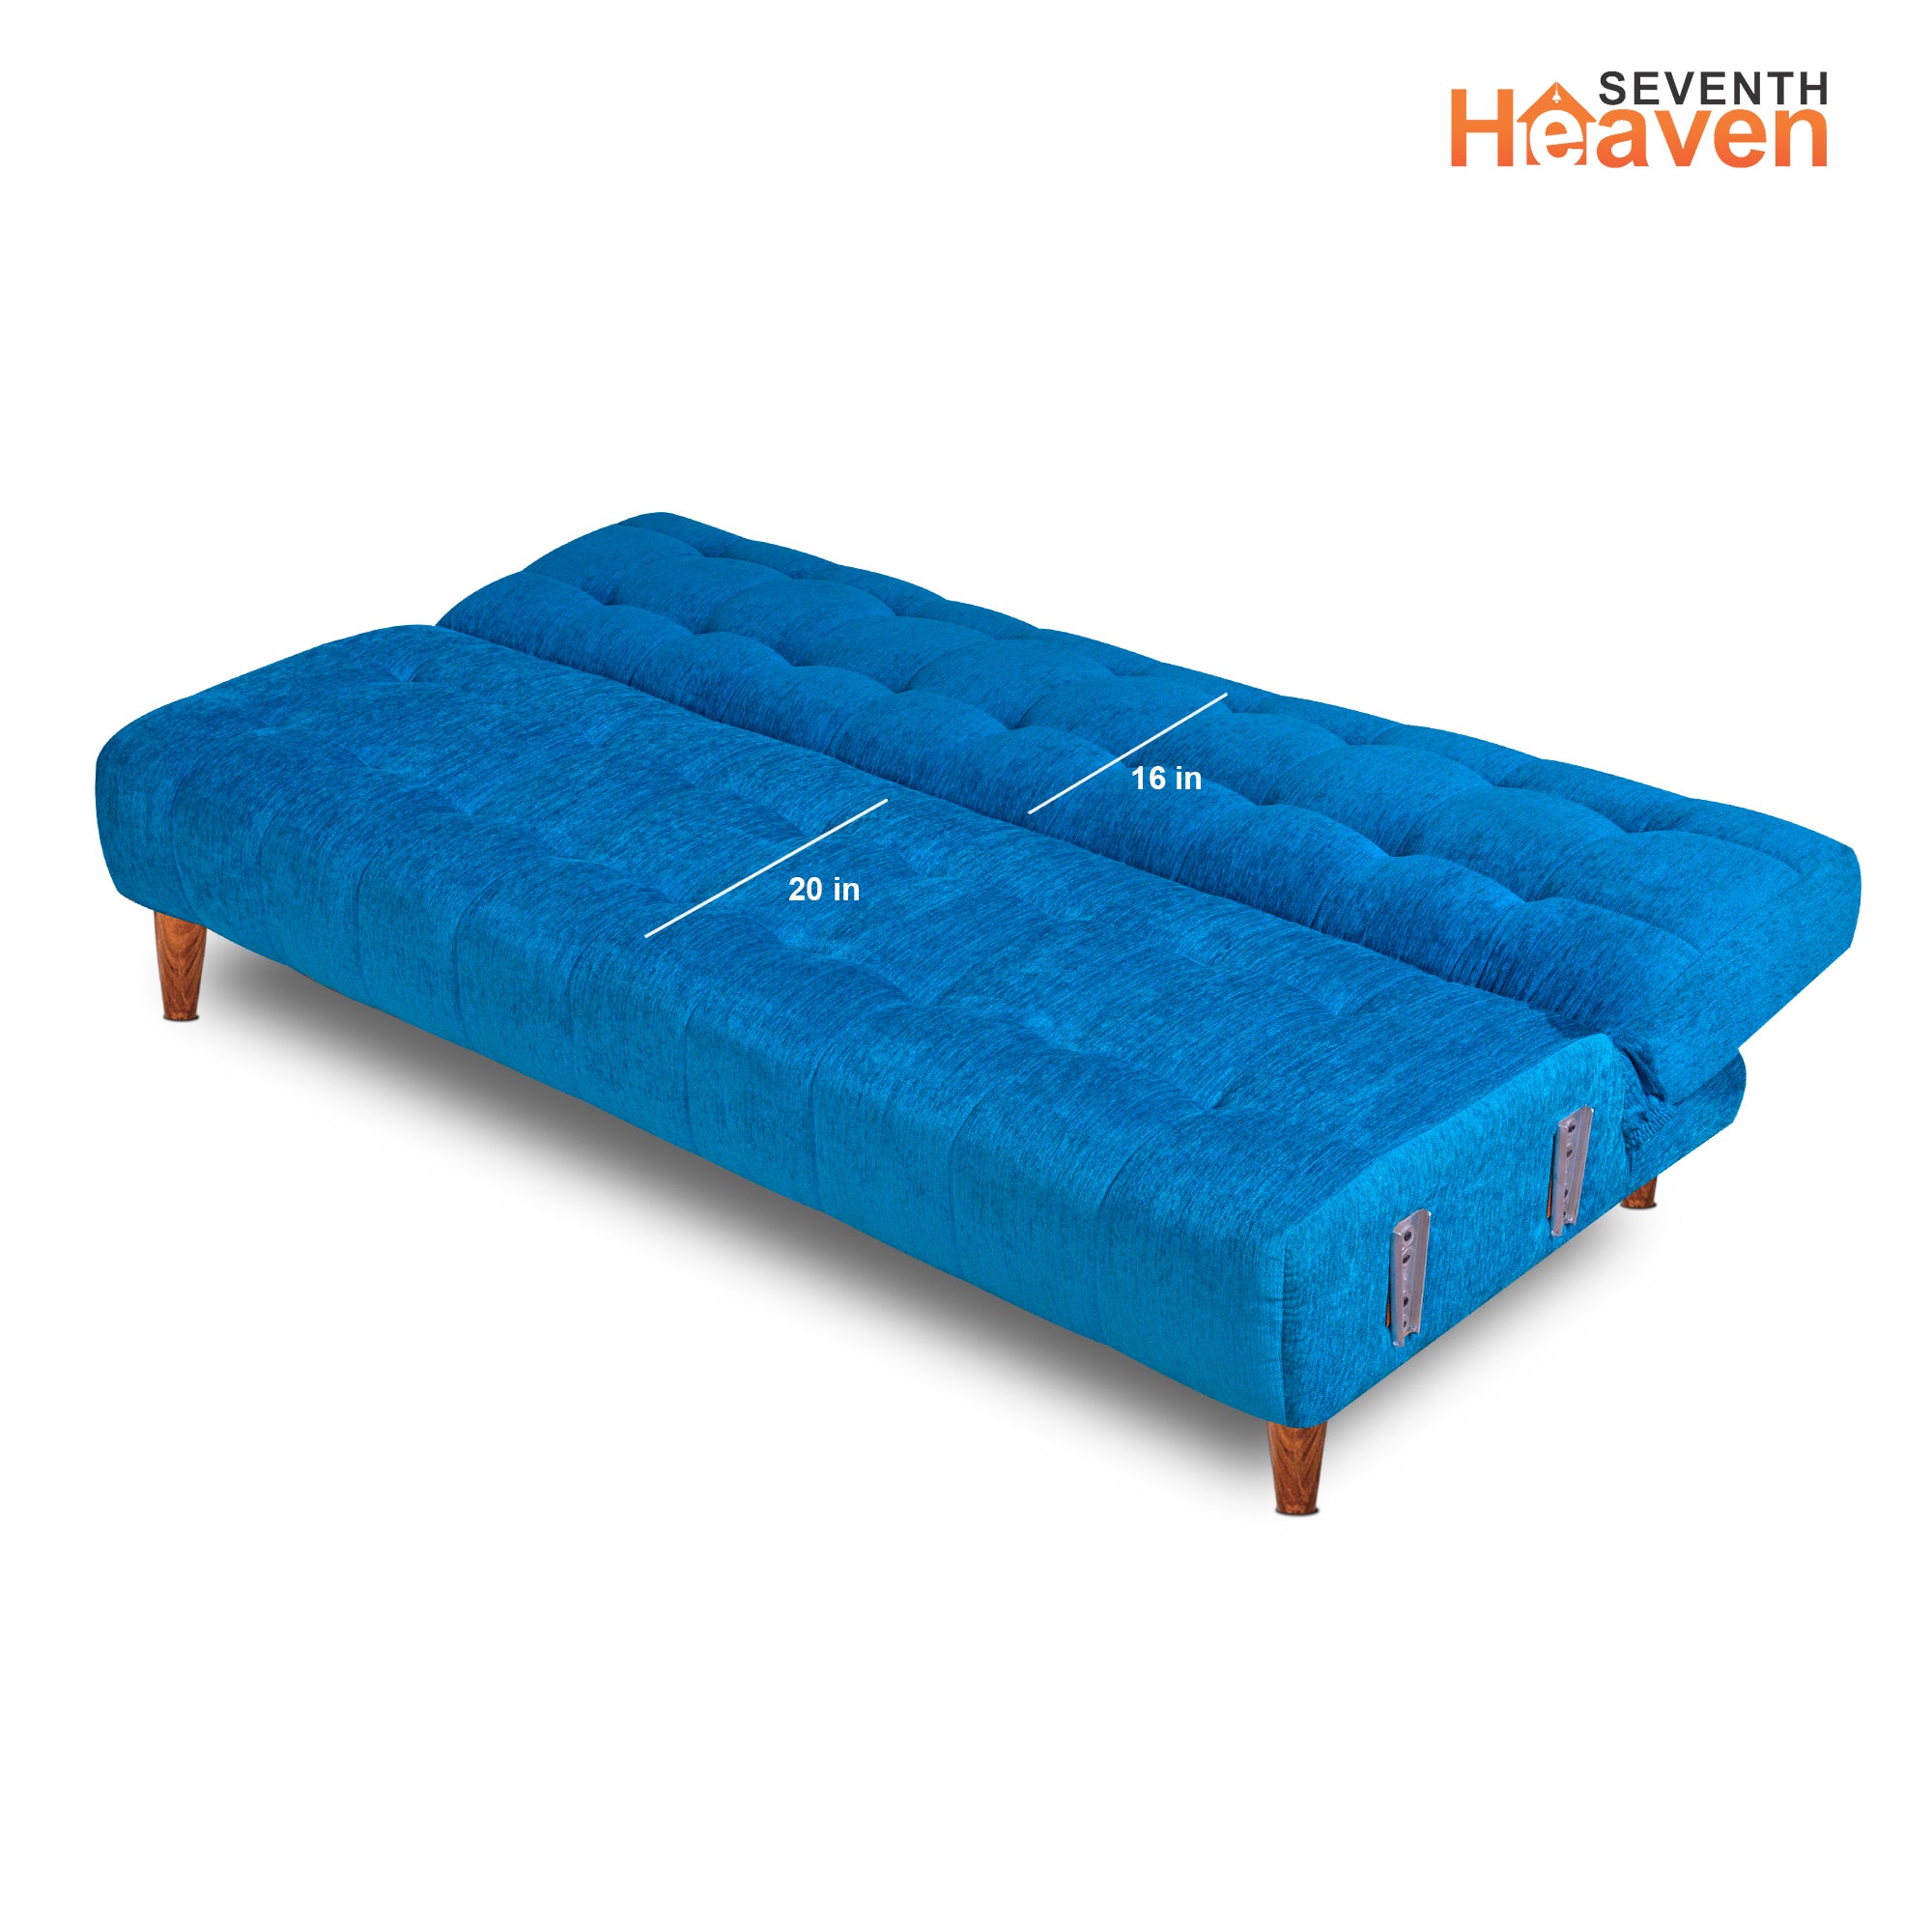 Seventh Heaven 4 Seater Wooden Sofa cum Bed, Chenille Molfino Fabric 72x36x16: 3 Year Warranty 4 Seater Single Solid Wood Pull Out Sofa Cum Bed  (Finish Color - Sky Blue Delivery Condition - DIY(Do-It-Yourself))